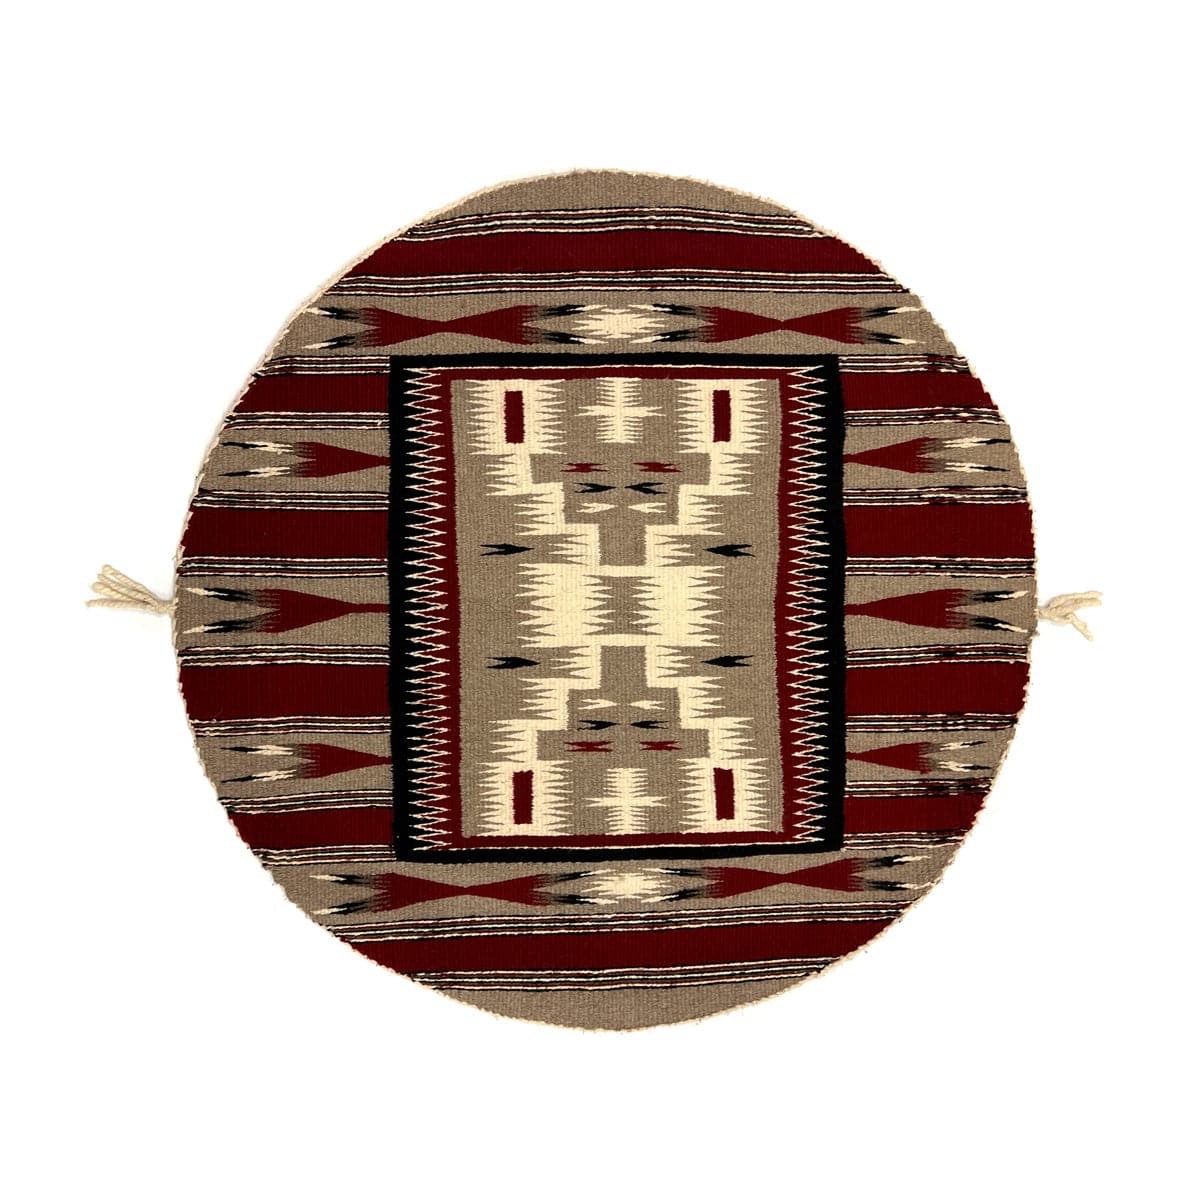 
Navajo Round Rug with Crystal Storm Pattern c. 1980-90s, 40.5" x 41" (T6439)